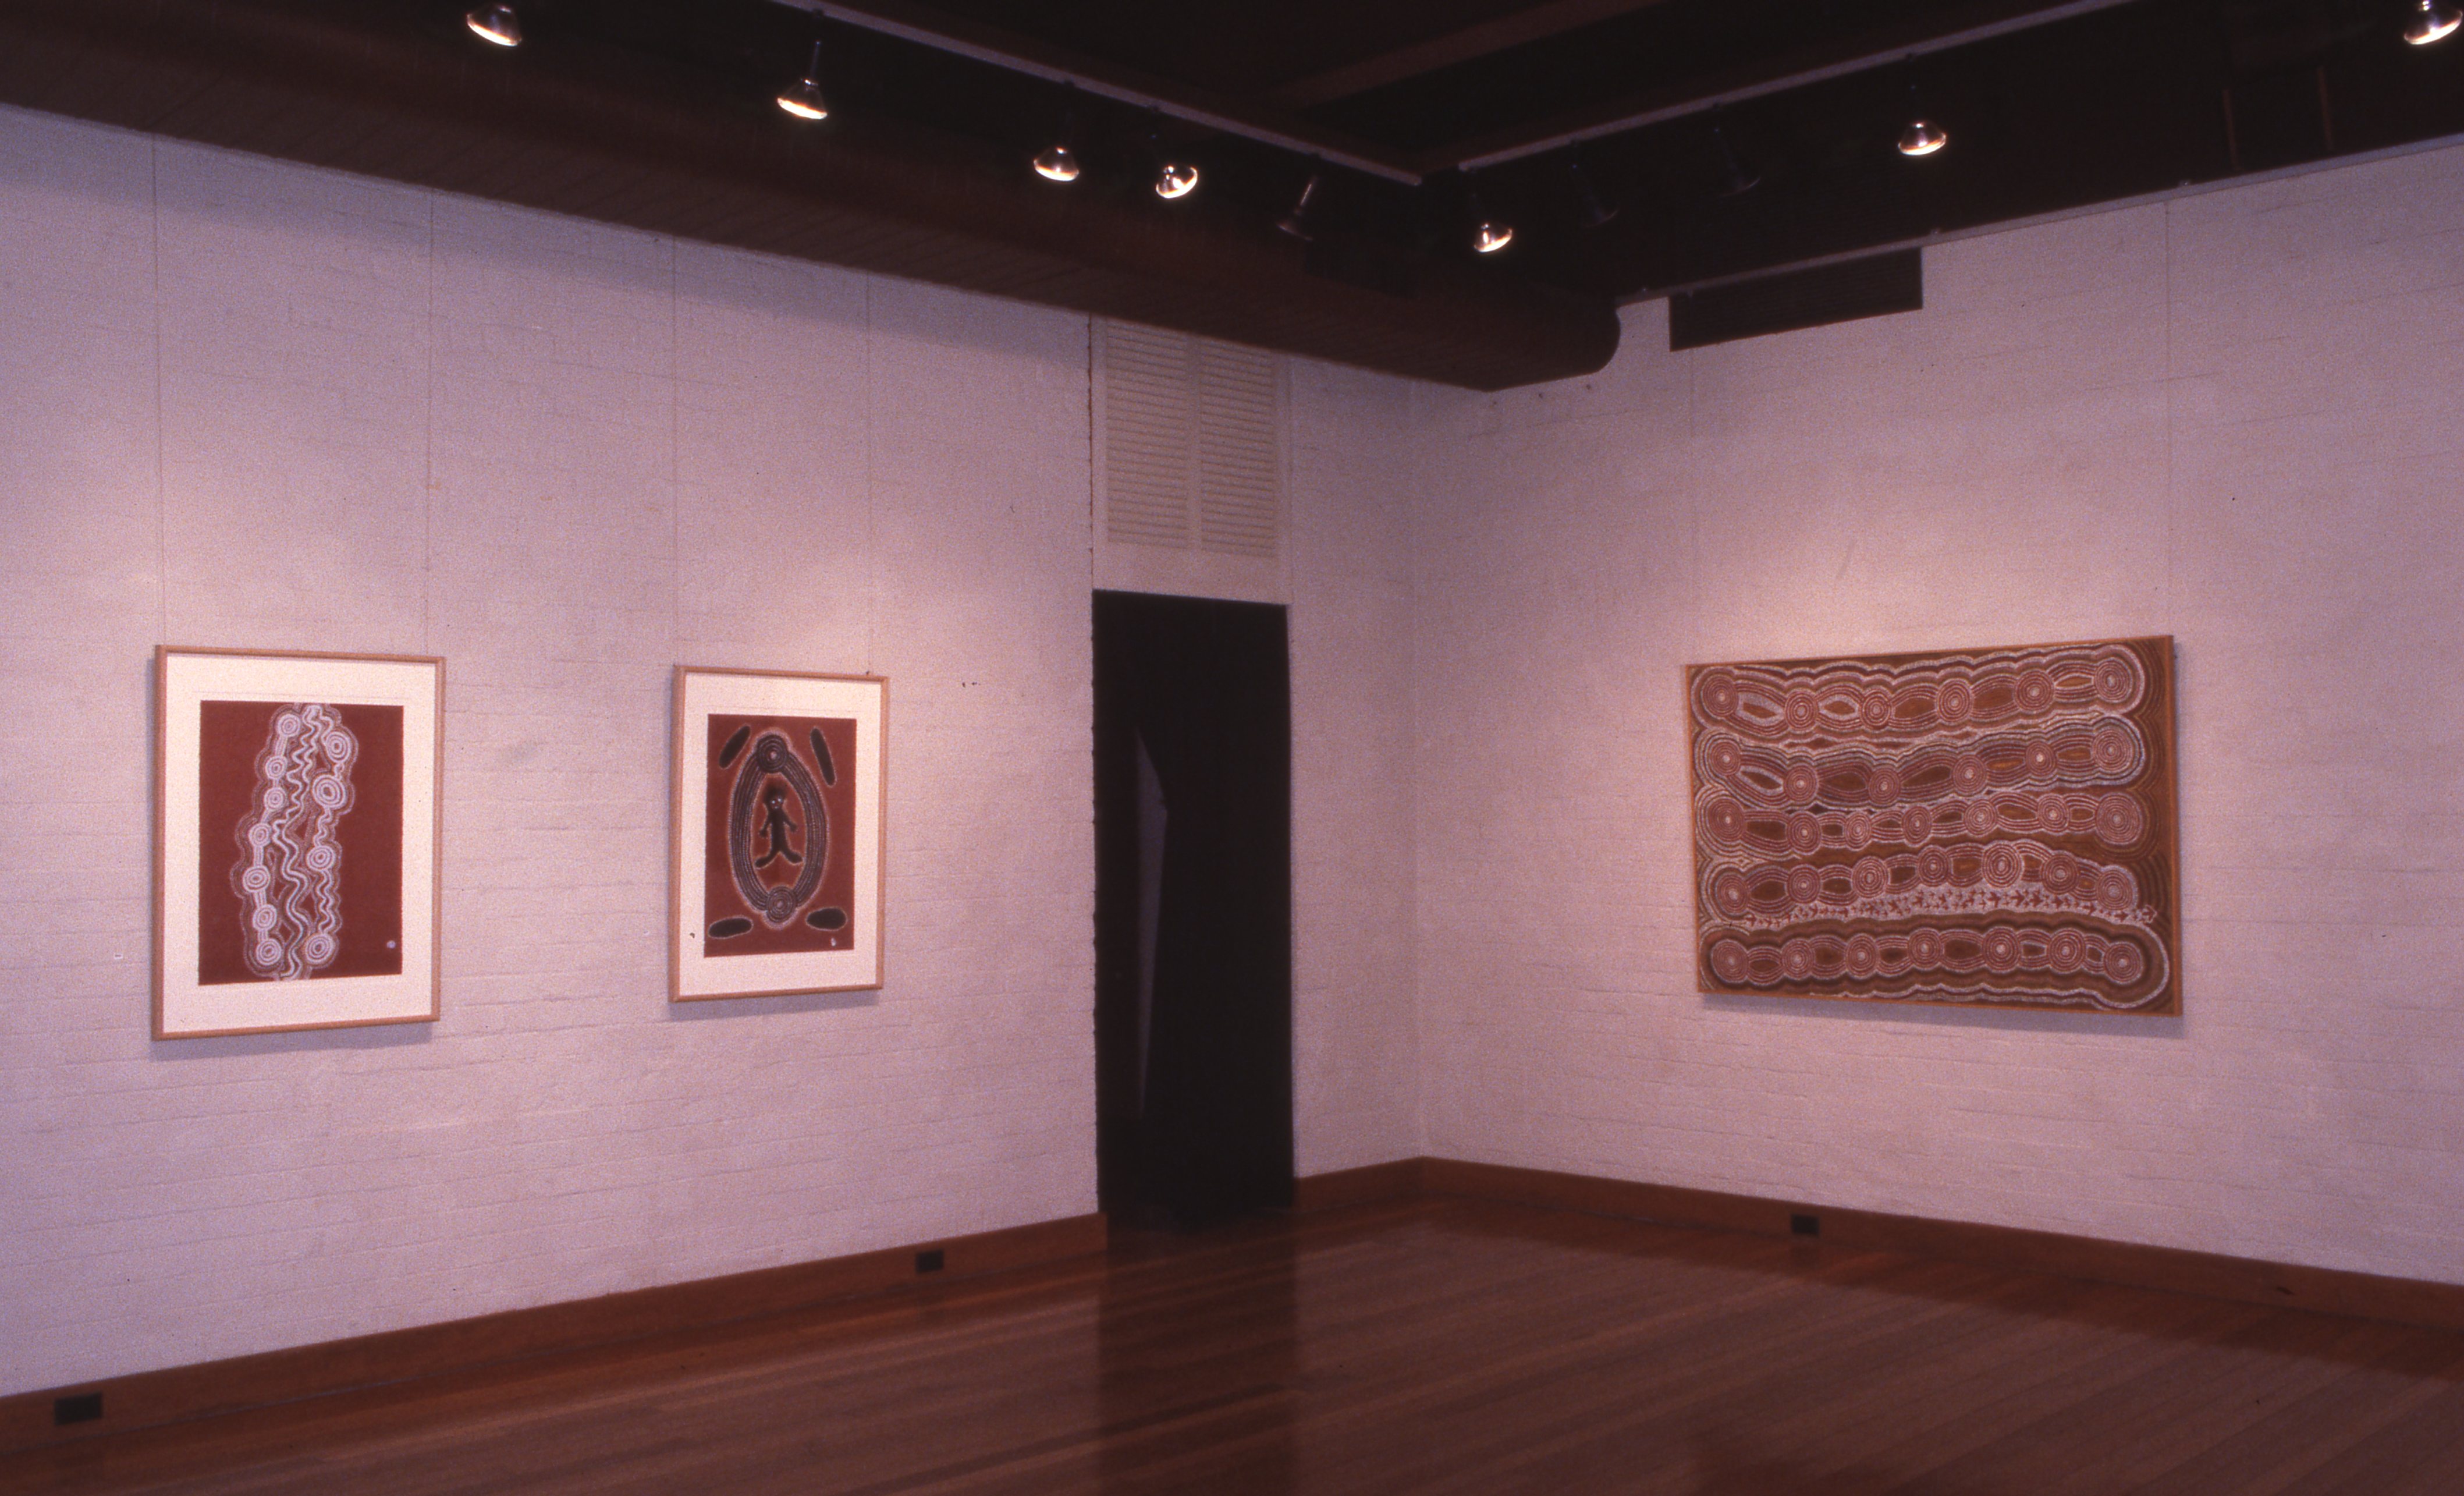 idg_archive_1987_charlie_tjungurrayi_a_retrospective_exhibition_of_paintings_1970-1986_006_install.jpg